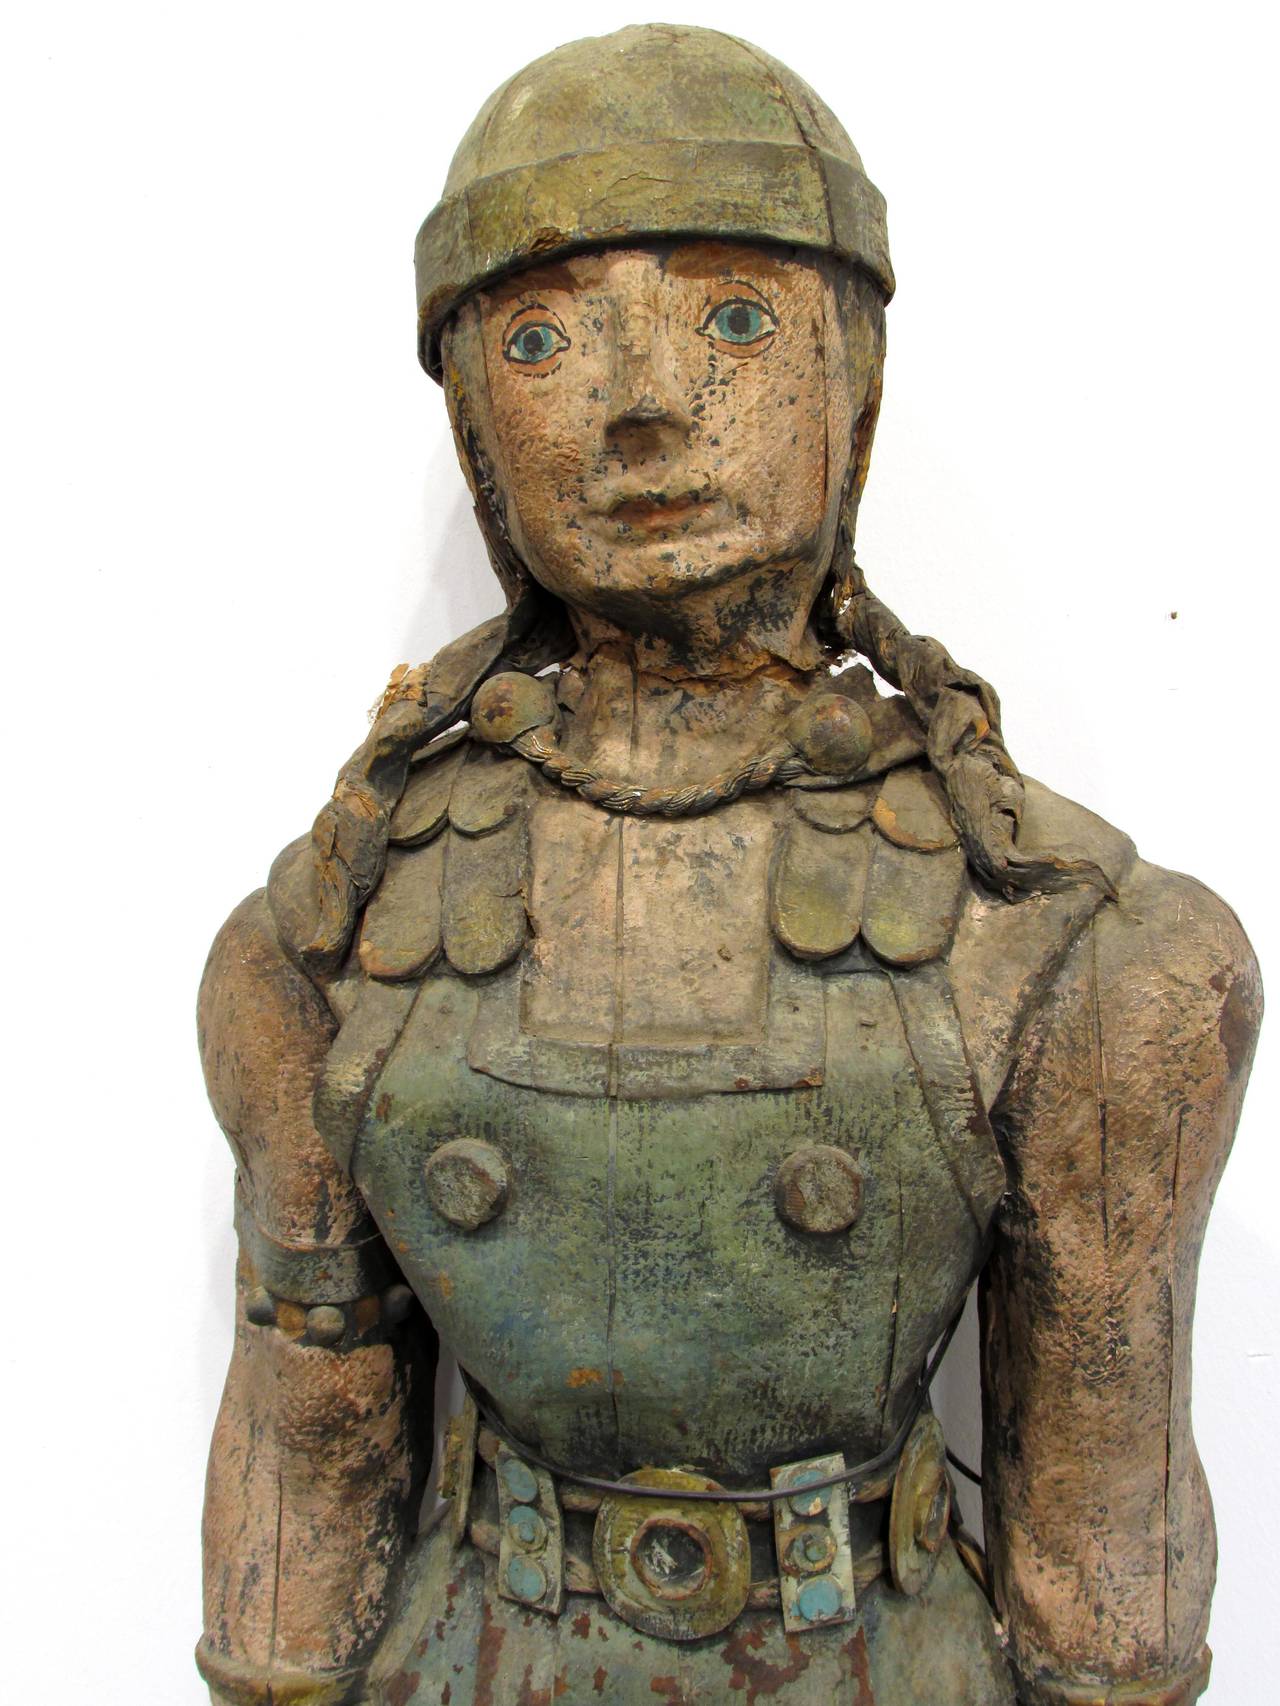 Large antique painted paper mache figure of a Viking Shieldmaiden now mounted as a hanging figure but orginially stood in a base or display